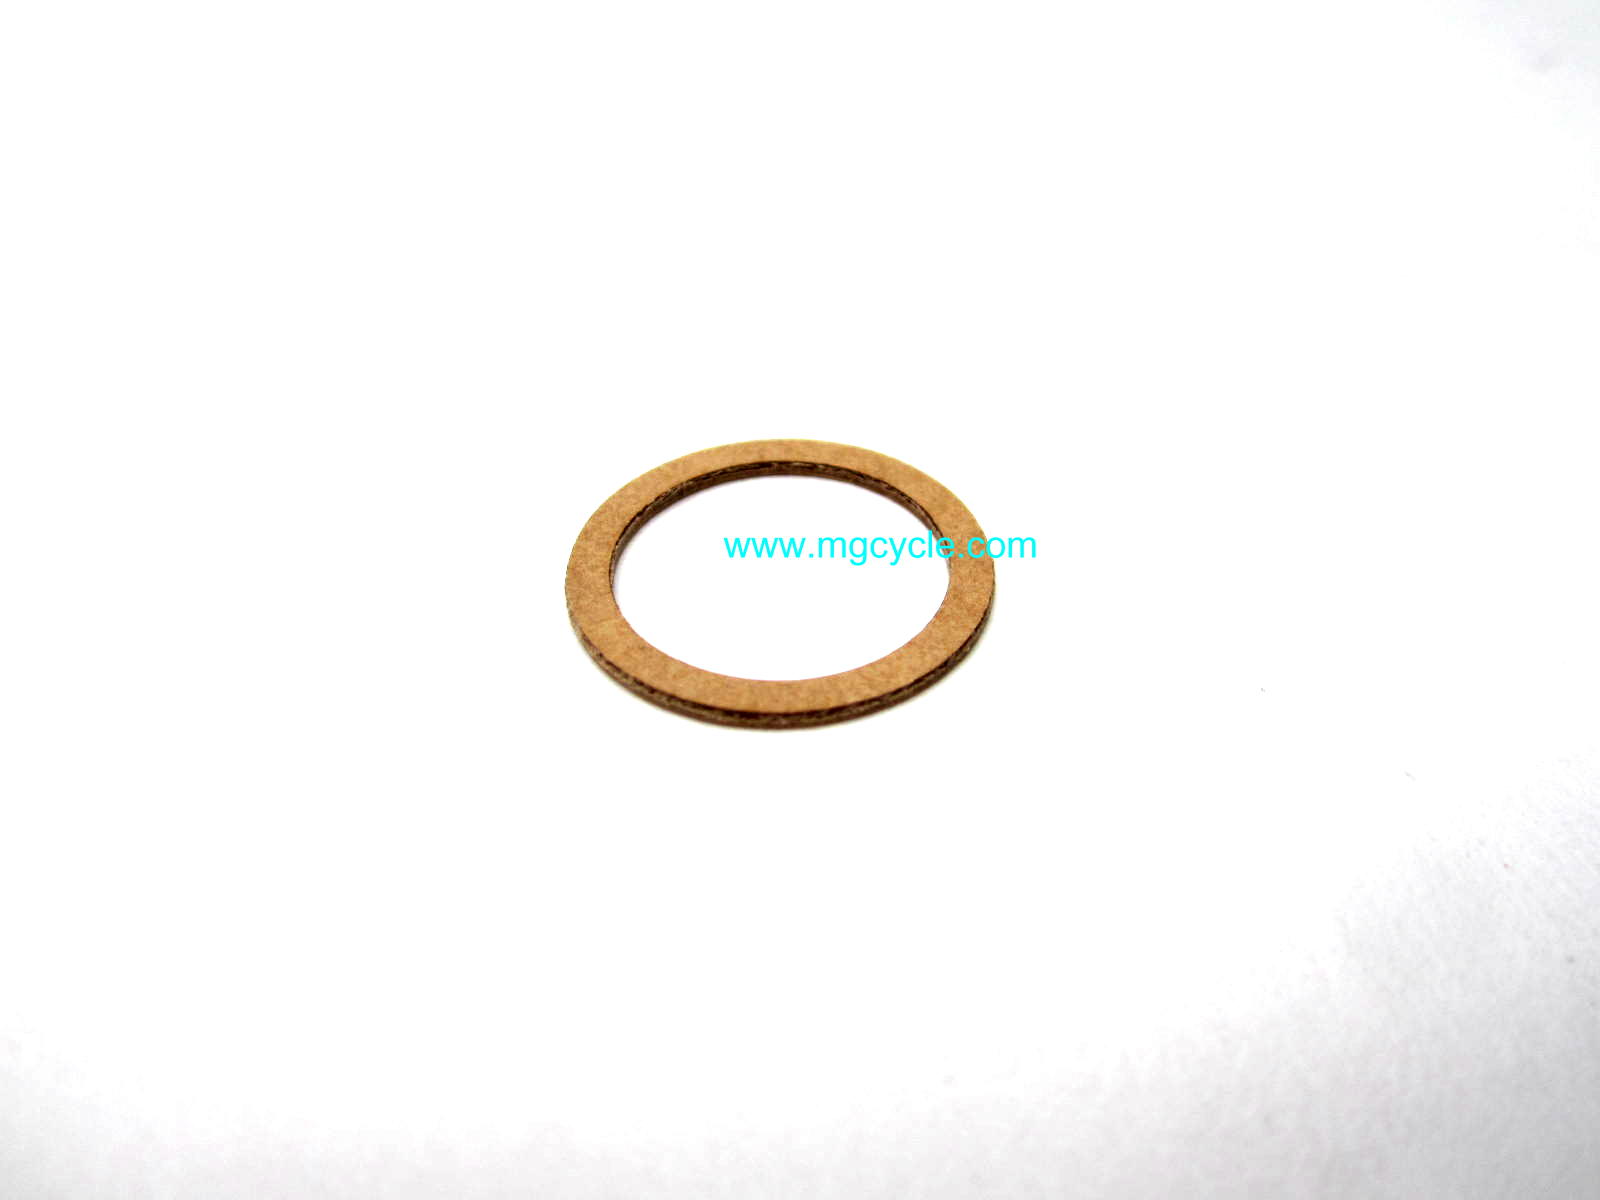 Dellorto 4057 bowl nut gasket VHB and early PHF 13933900